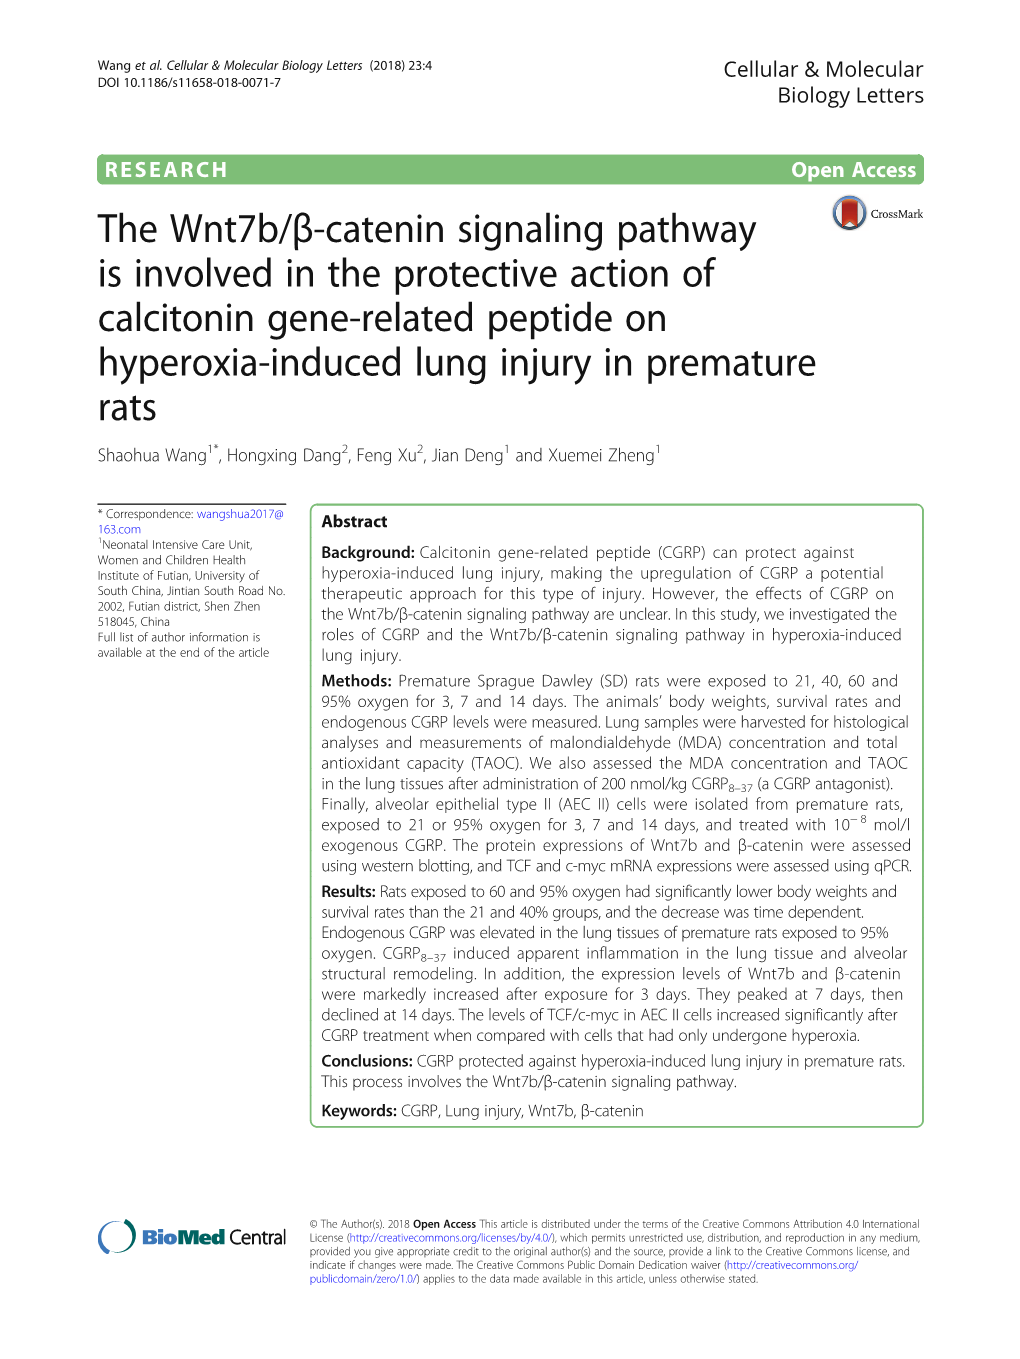 The Wnt7b/Β-Catenin Signaling Pathway Is Involved in The